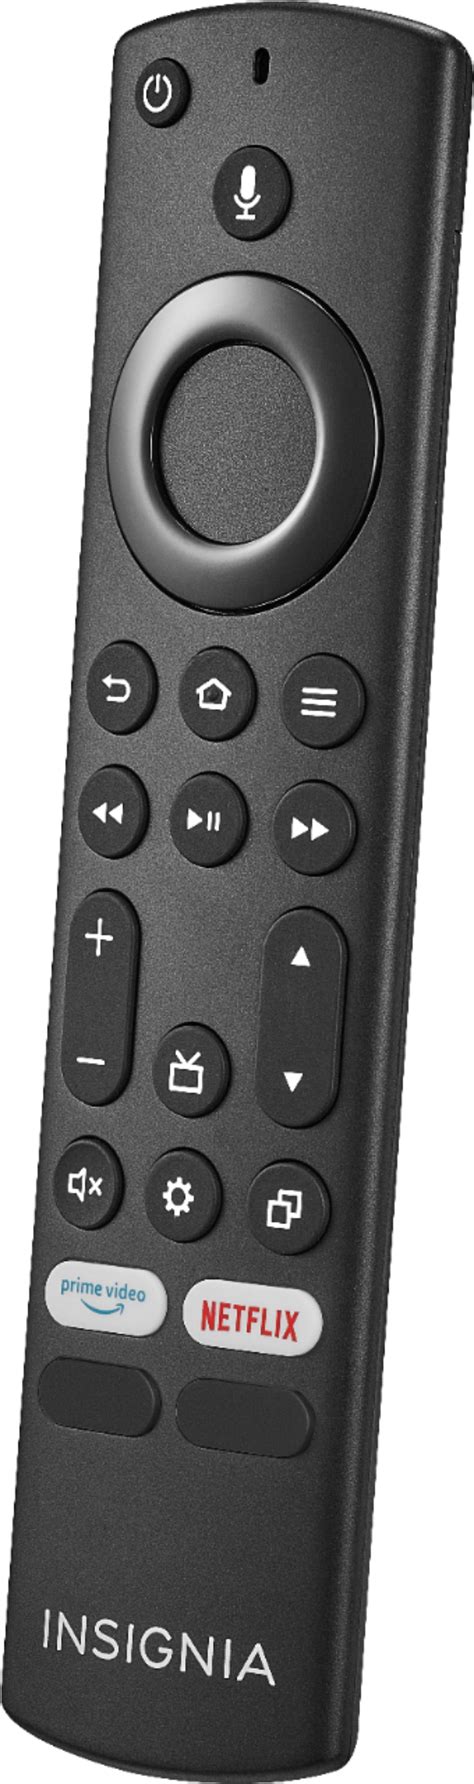 Best Buy Insignia Replacement Tv Remote For Insignia Or Toshiba Fire